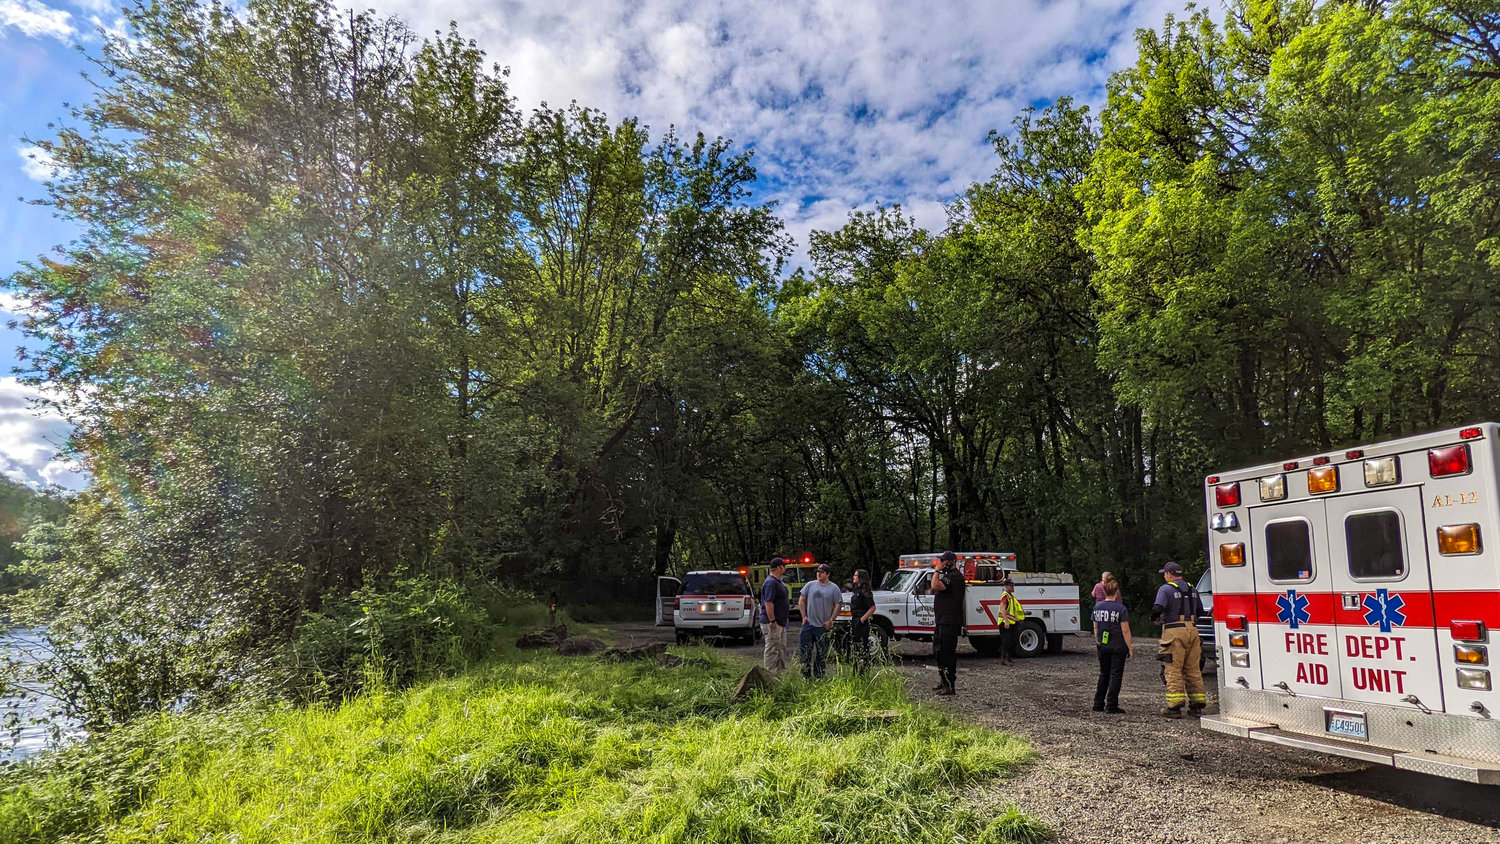 Responders including Grays Harbor Fire District 1 and the Grays Harbor Sheriff's Office stand on the scene after rescuing a man from the Chehalis River on Saturday.